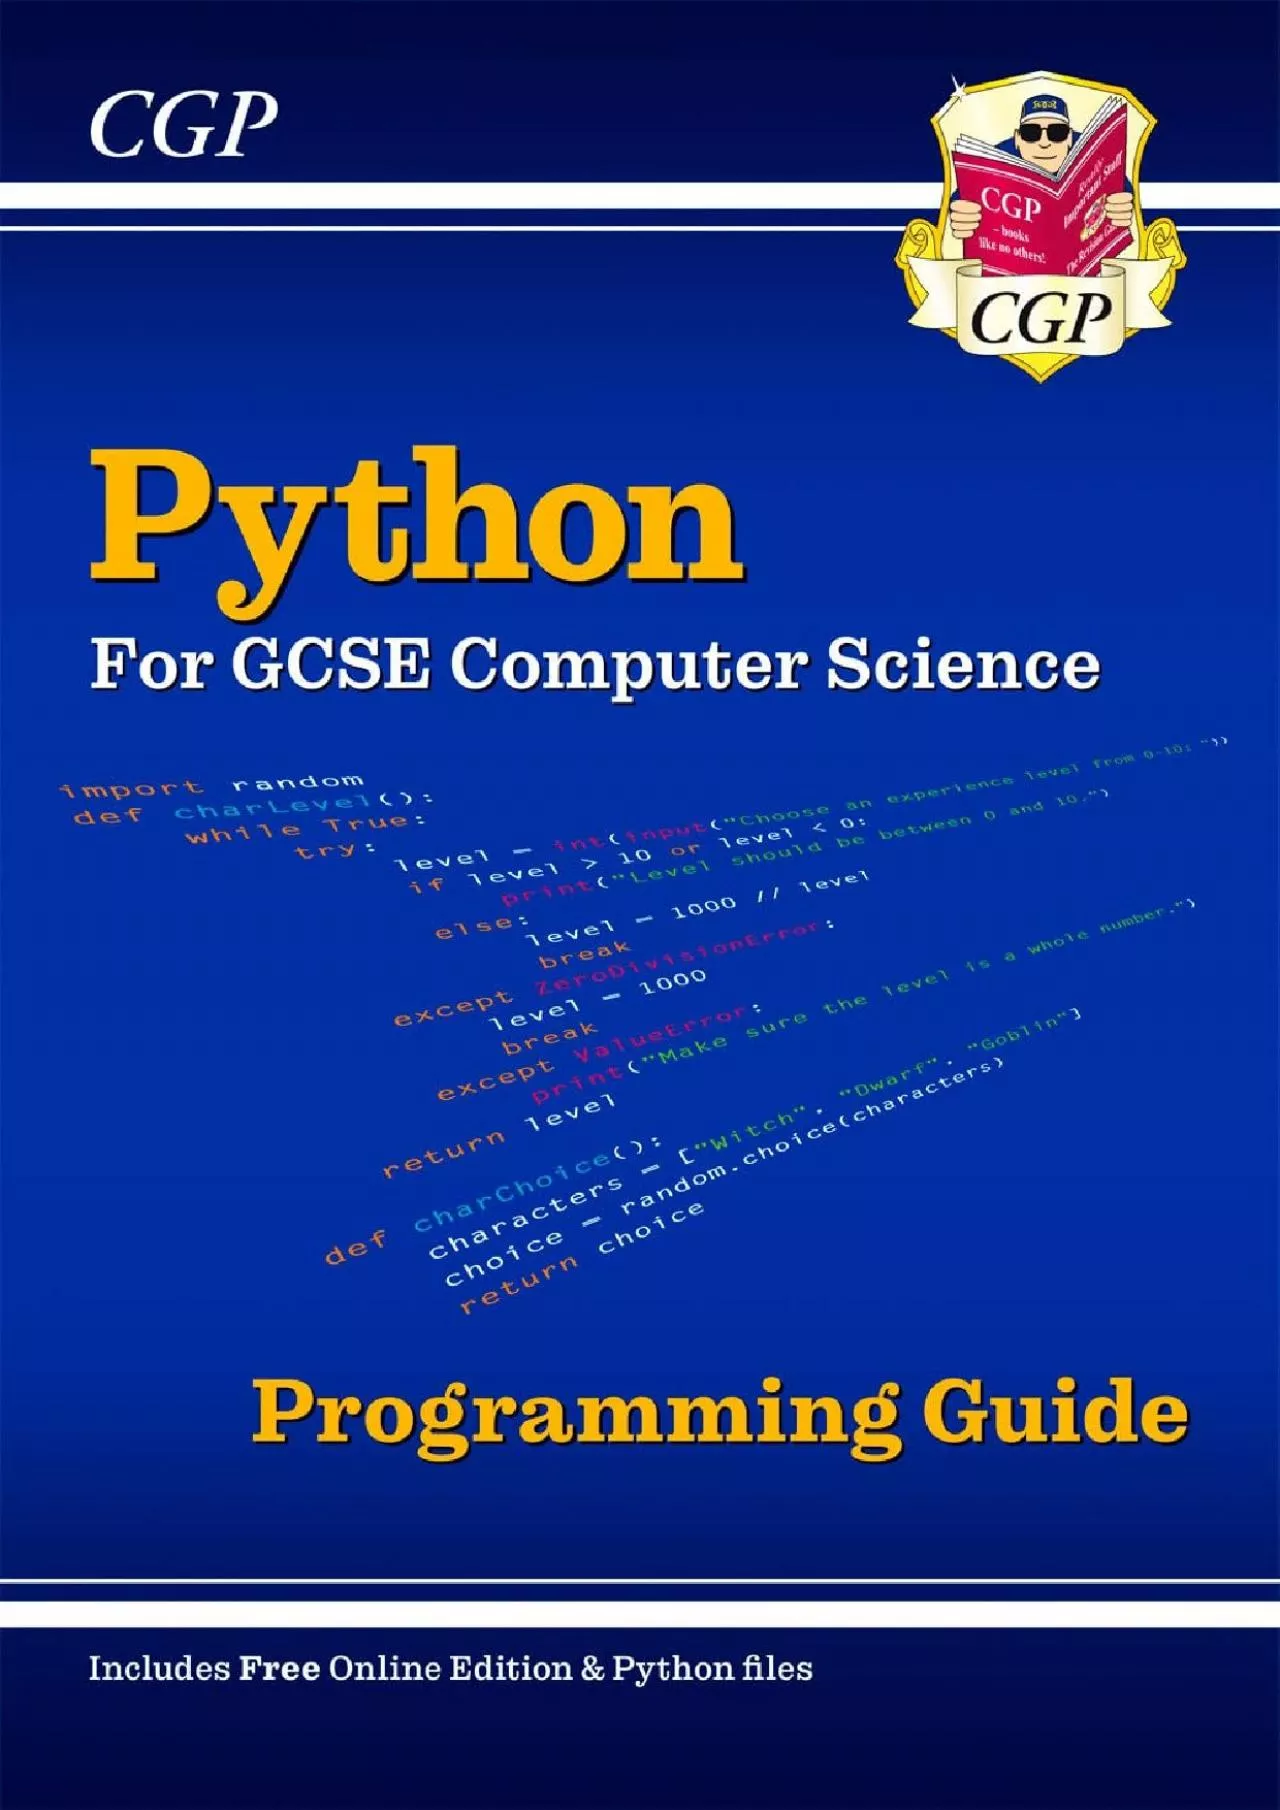 [BEST]-Python Programming Guide for GCSE Computer Science (includes Online Edition  Python